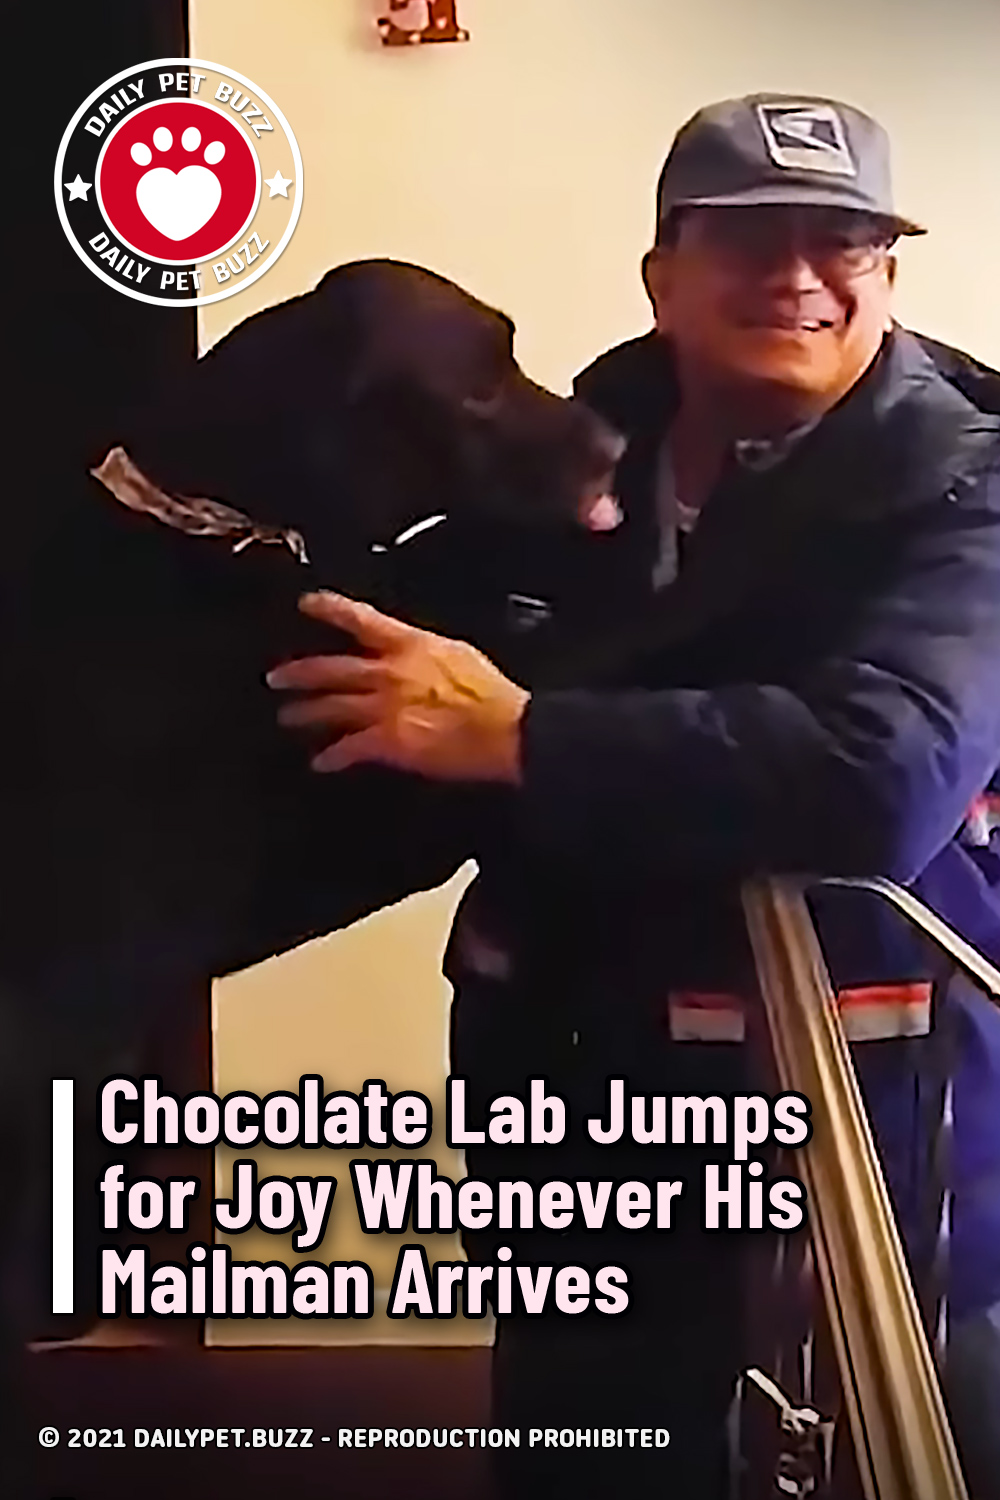 Chocolate Lab Jumps for Joy Whenever His Mailman Arrives